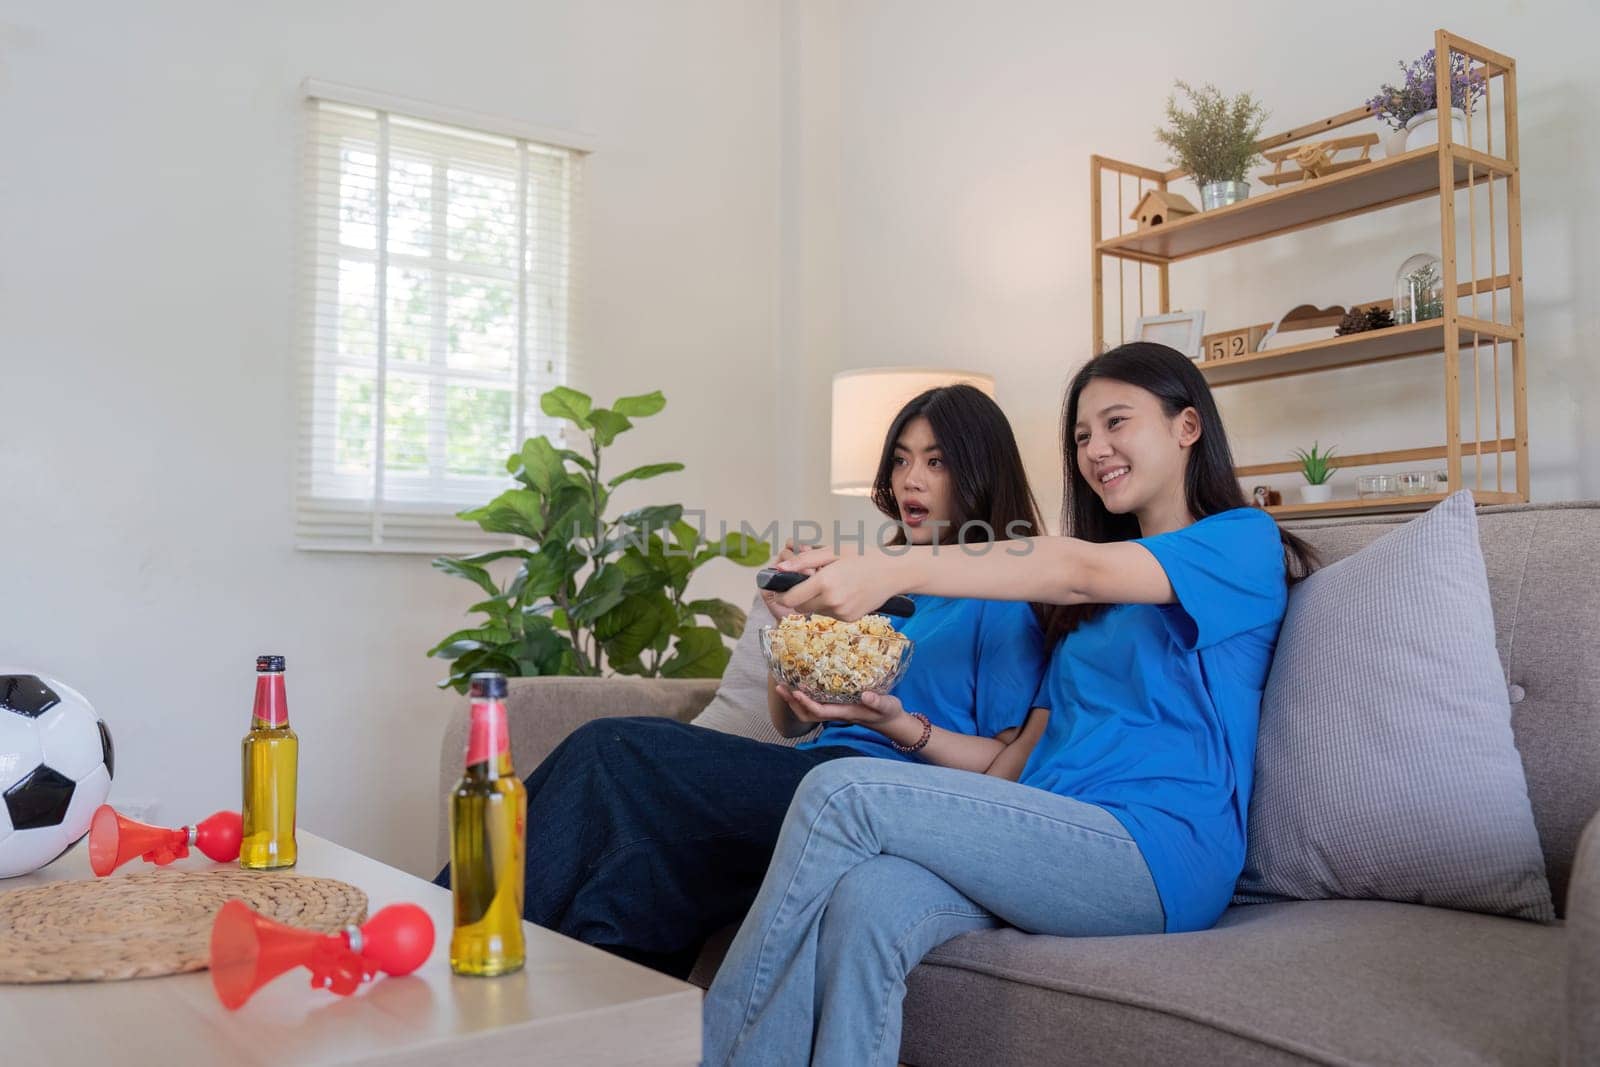 Lesbian couple cheering for Euro football at home with snacks and beer. Concept of LGBTQ pride, sports enthusiasm, and domestic leisure by nateemee